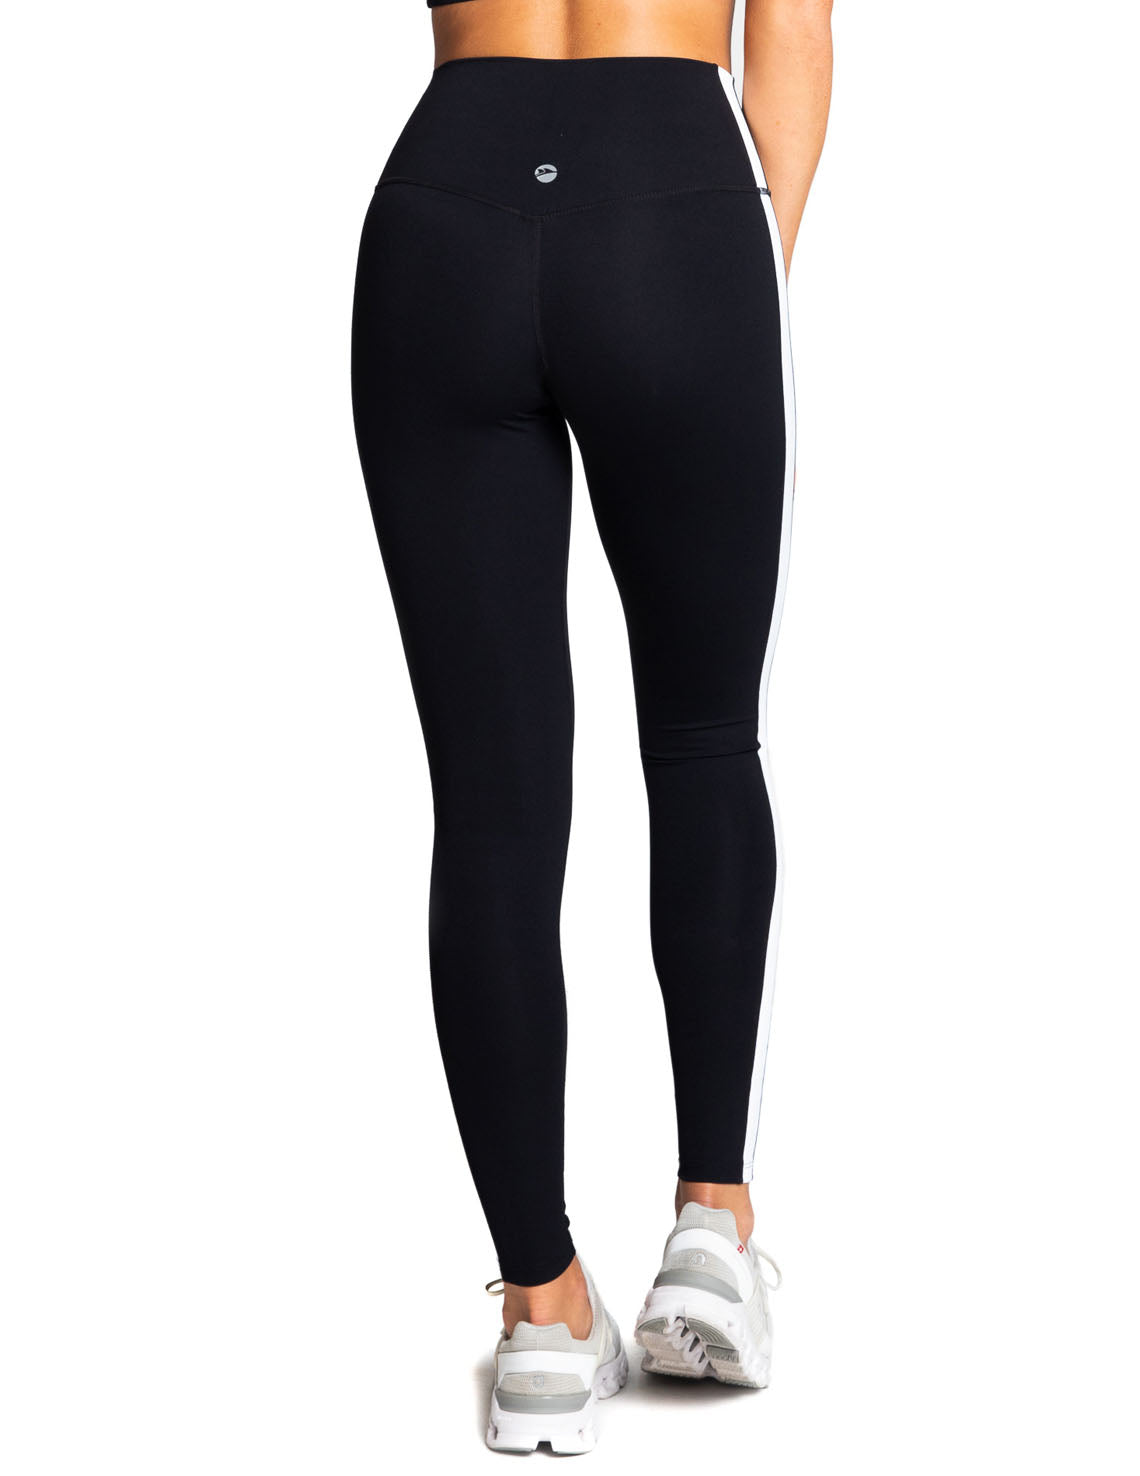 How To Wear Tennis Shoes With Leggings? – solowomen